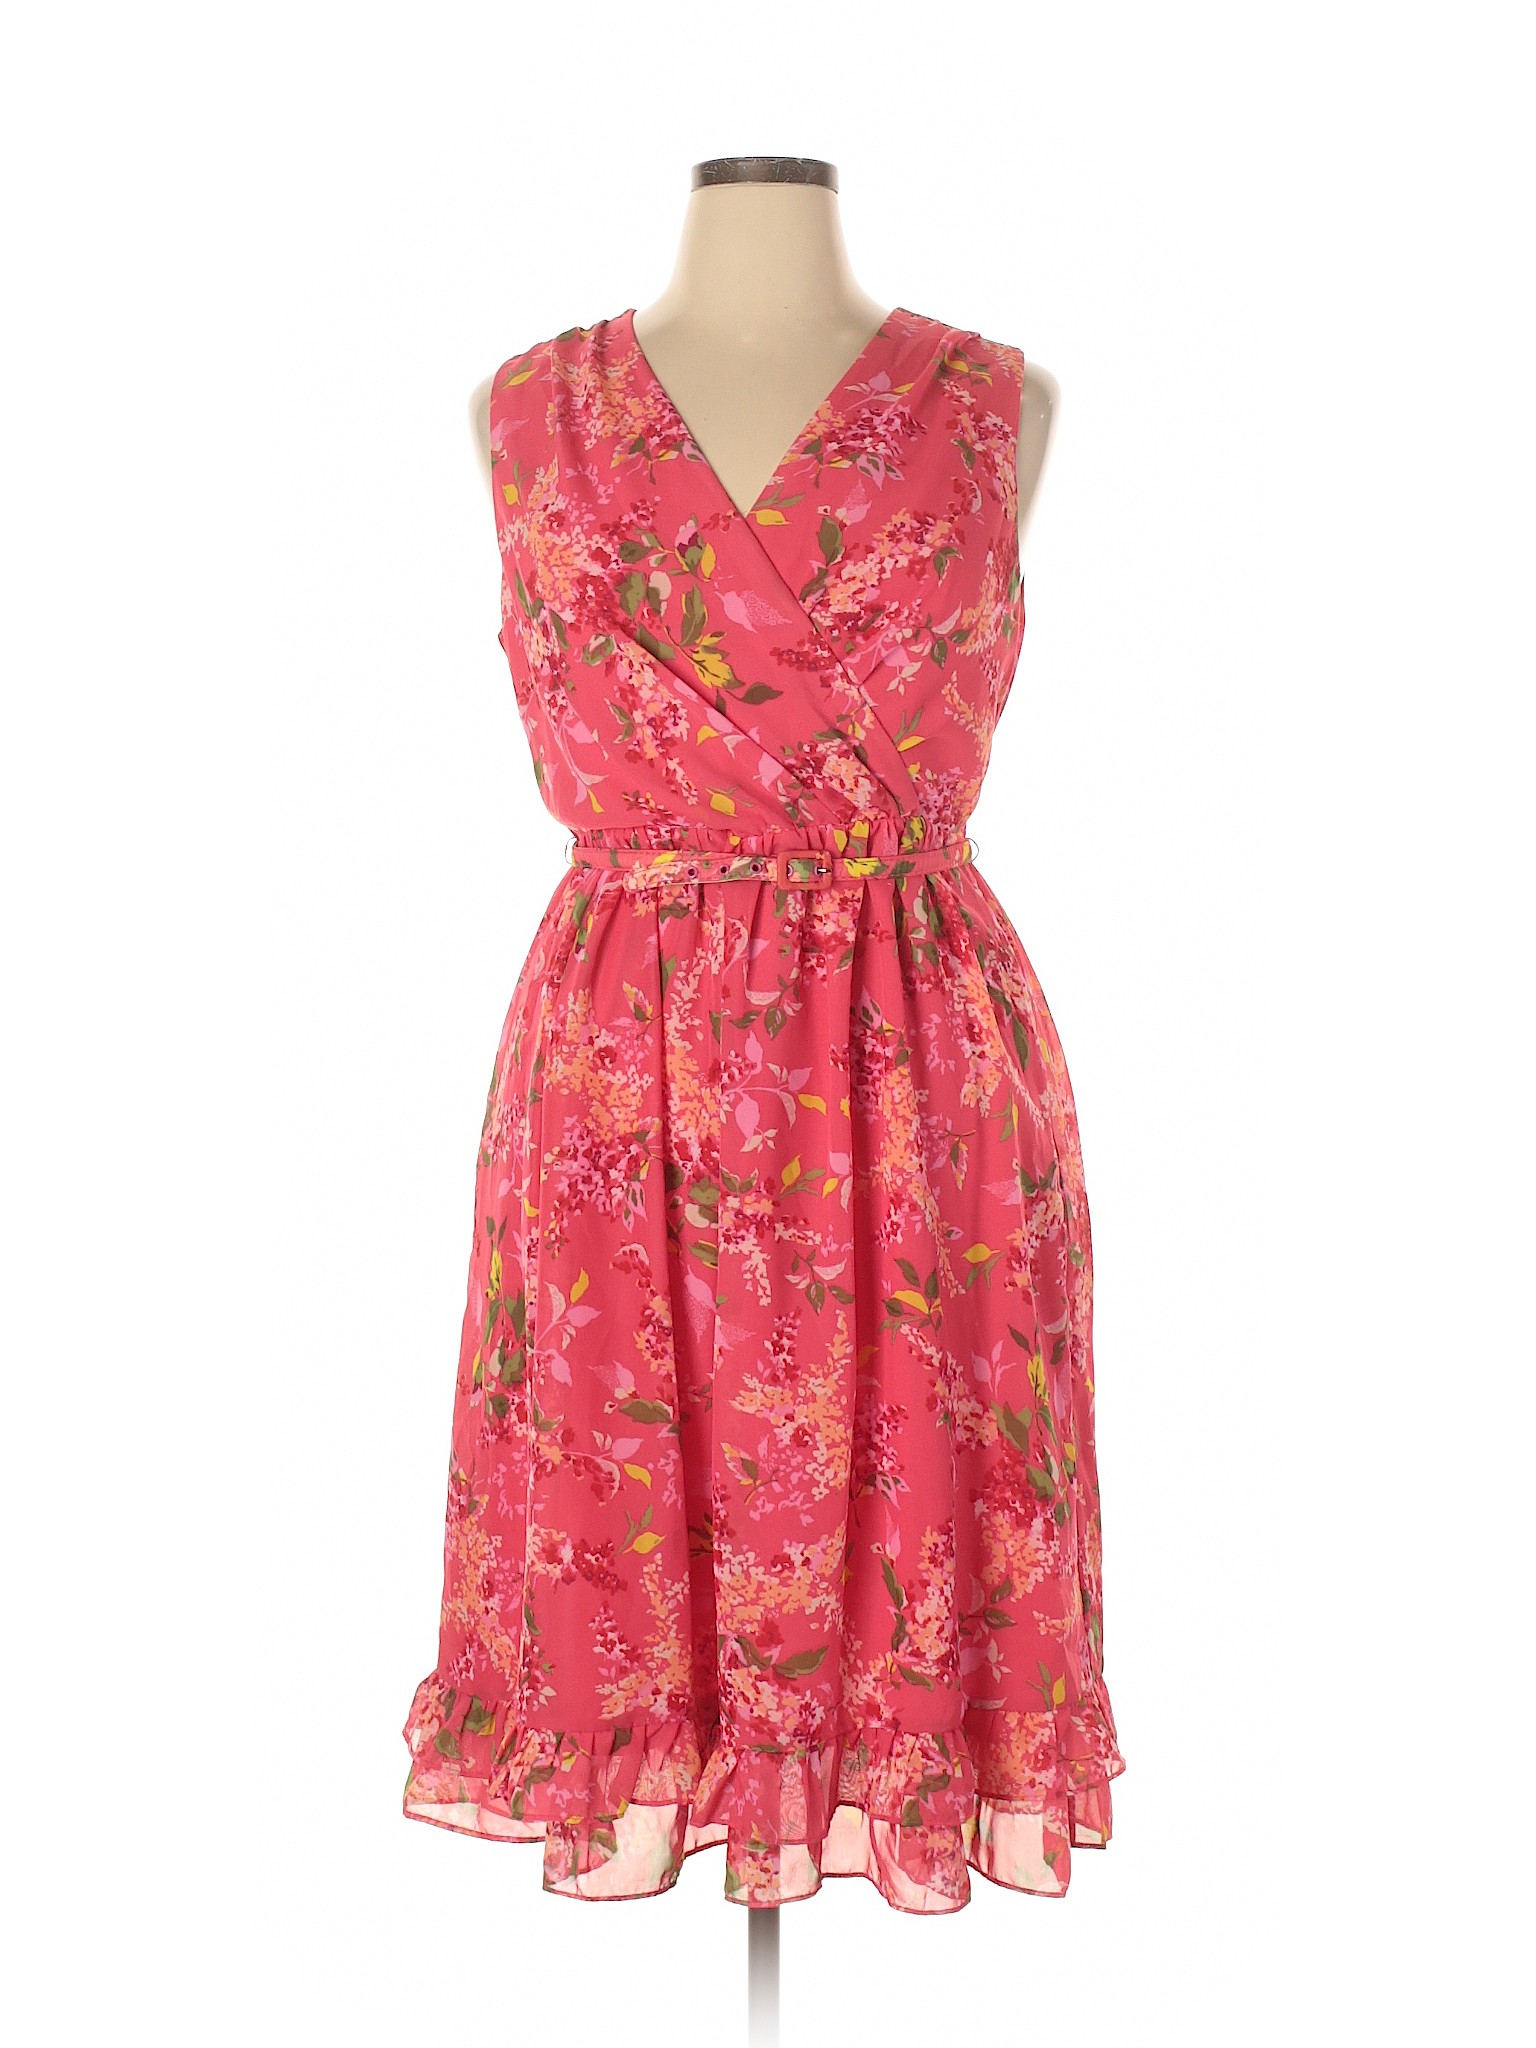 George Me by Mark Eisen 100% Polyester Floral Pink Casual Dress Size 14 ...